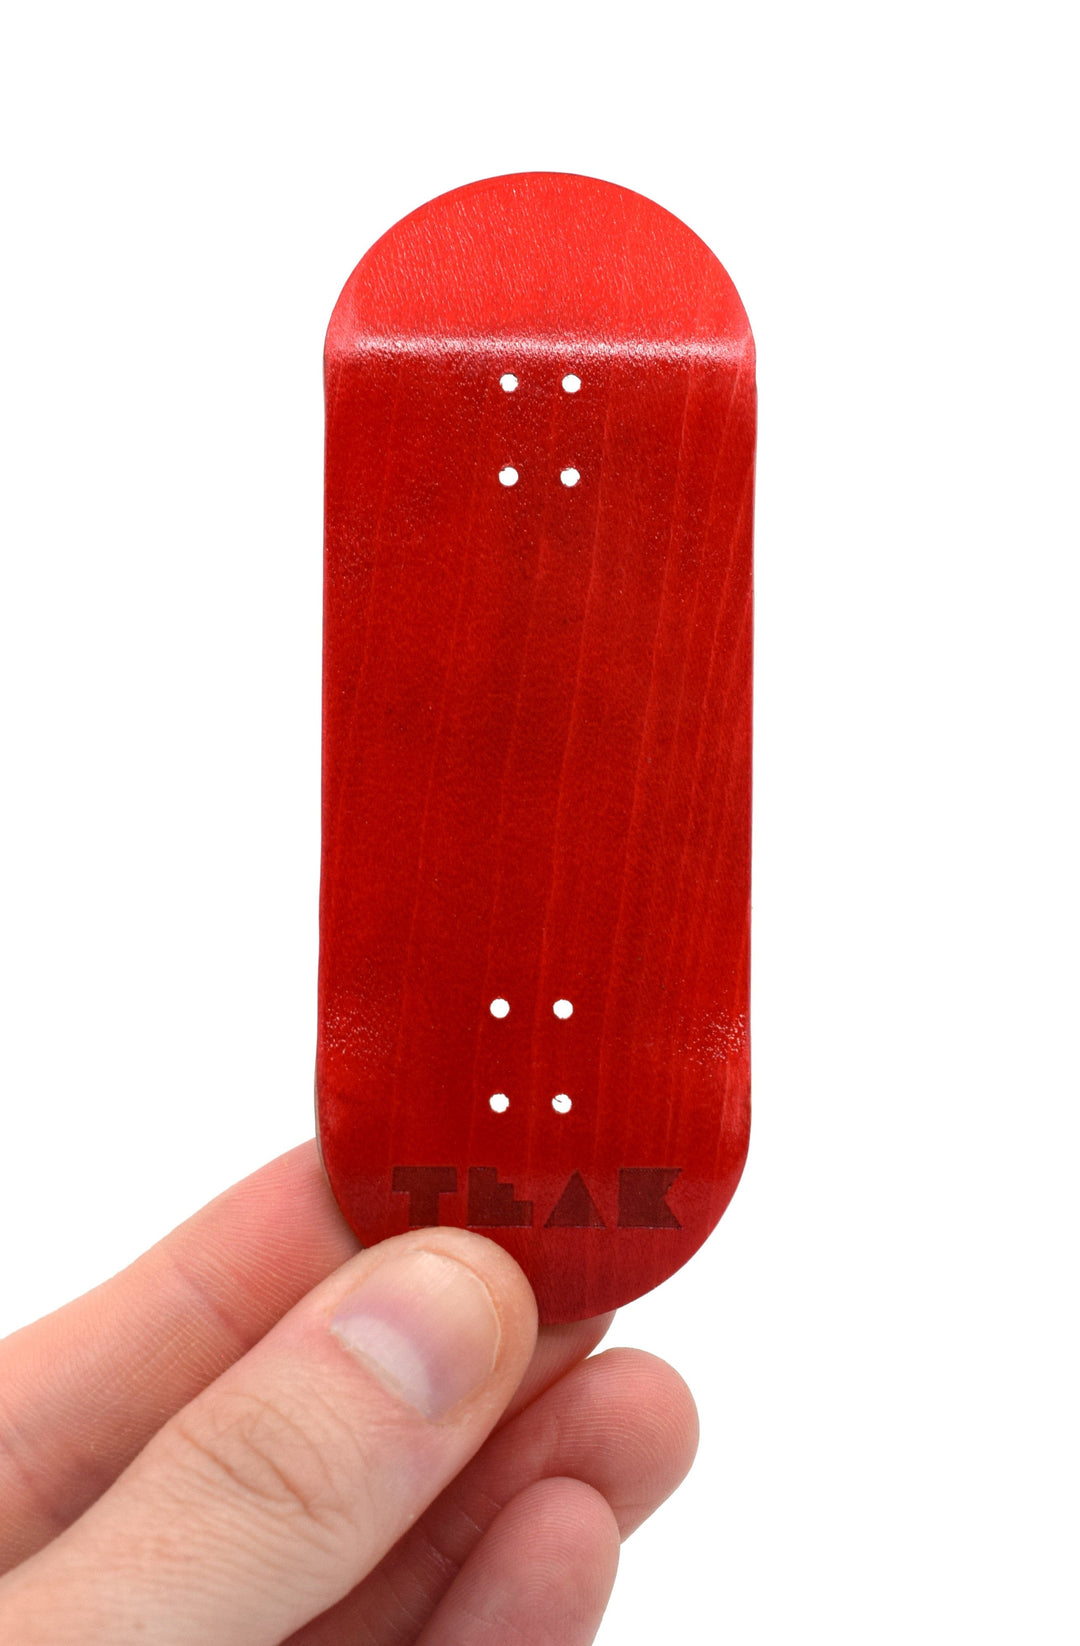 Teak Tuning PROlific Wooden 5 Ply Fingerboard Deck 35x95mm - Cherry Red - with Color Matching Mid Ply